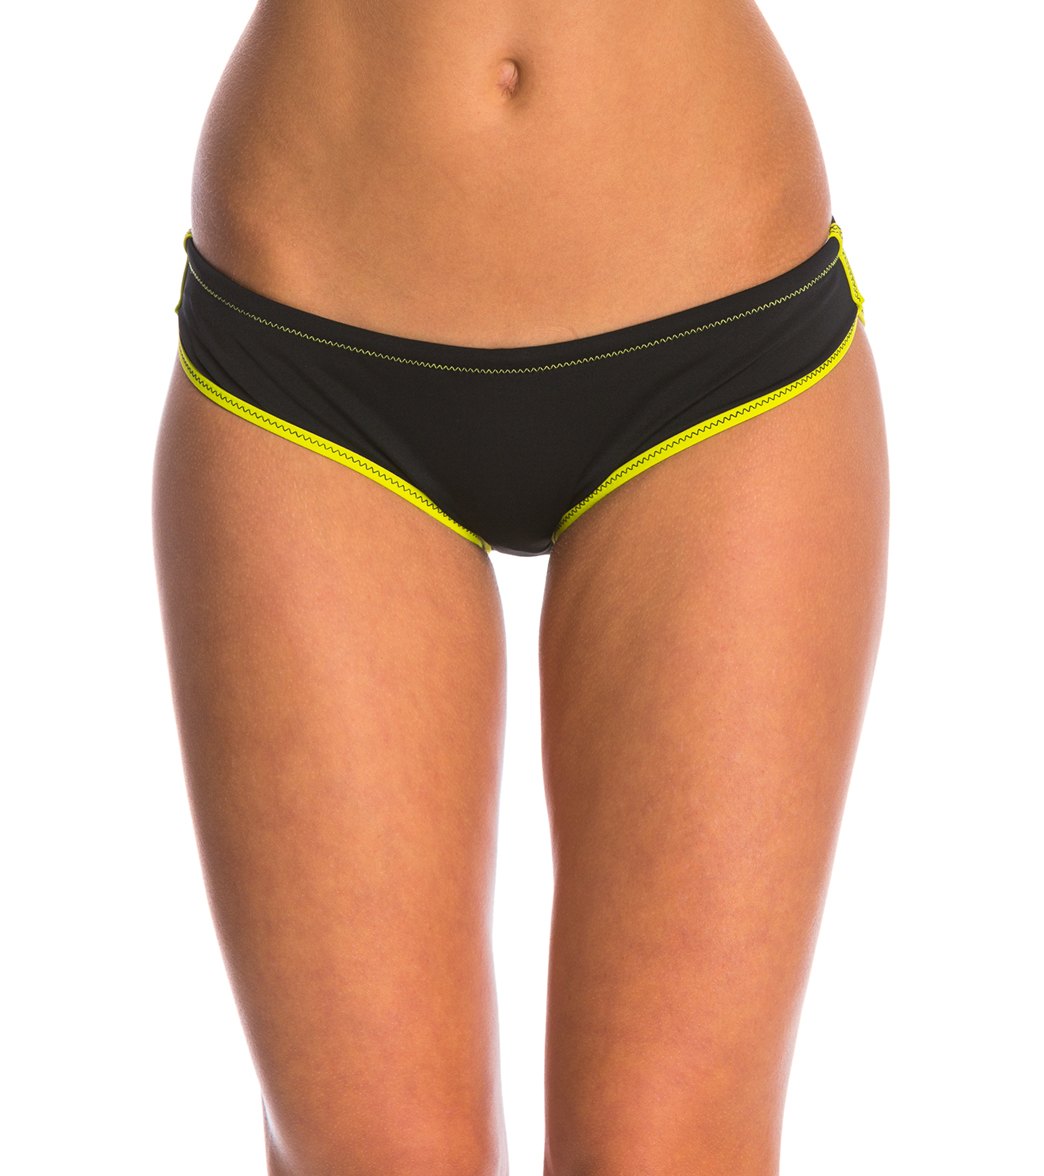 Arena Women's Sports Racer Brief Swimsuit - Black/Soft Green 28 Polyester/Pbt - Swimoutlet.com